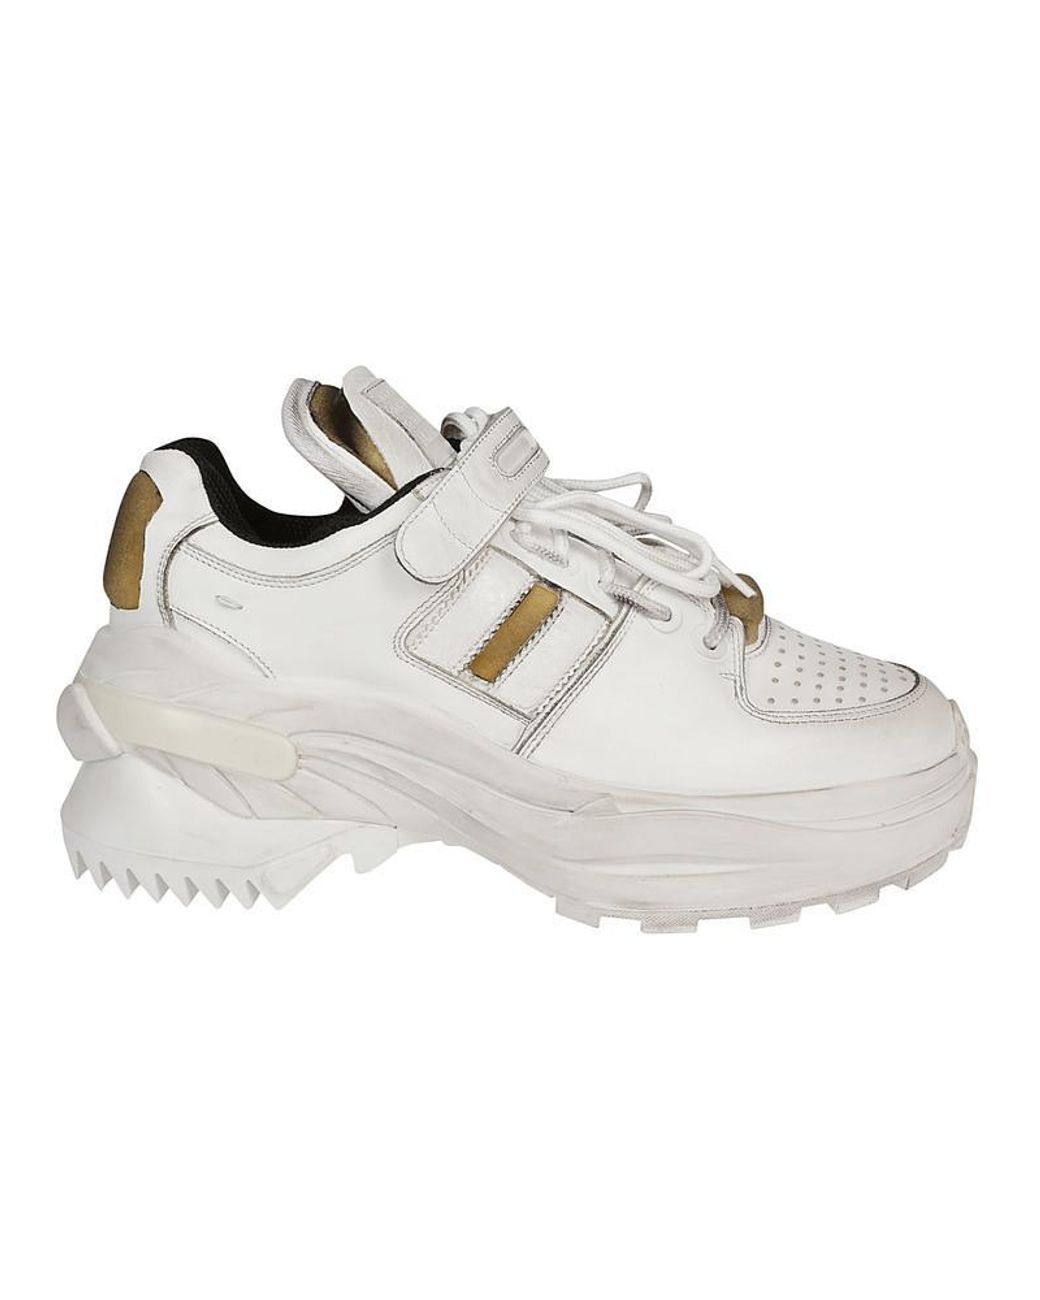 Maison Margiela Strap Lace-up Sneakers in White - Lyst